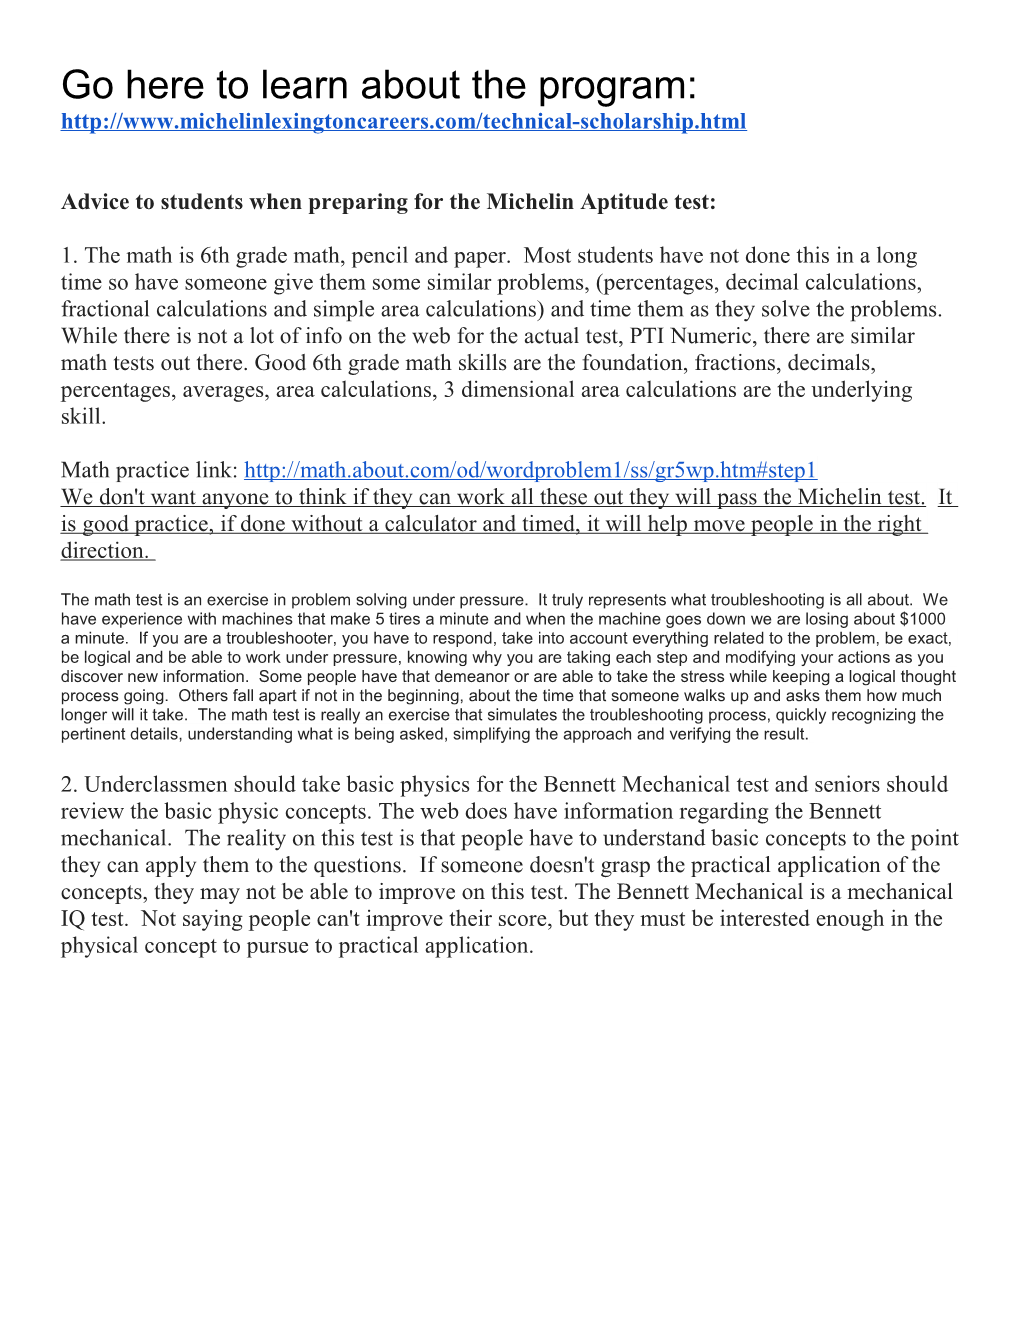 Advice to Students When Preparing for the Michelin Aptitude Test